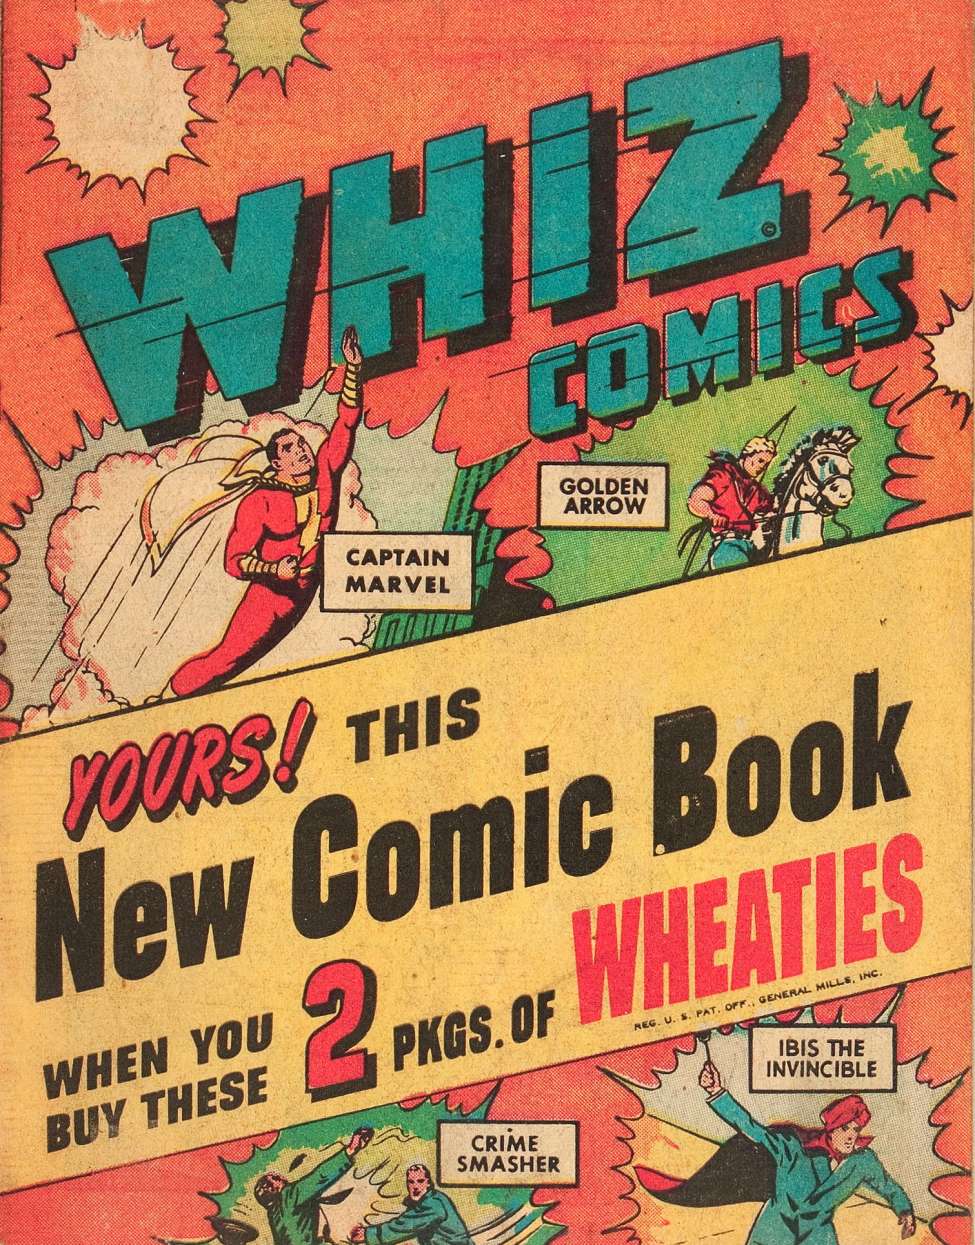 Comic Book Cover For Whiz Comics Wheaties Giveaway - Version 2